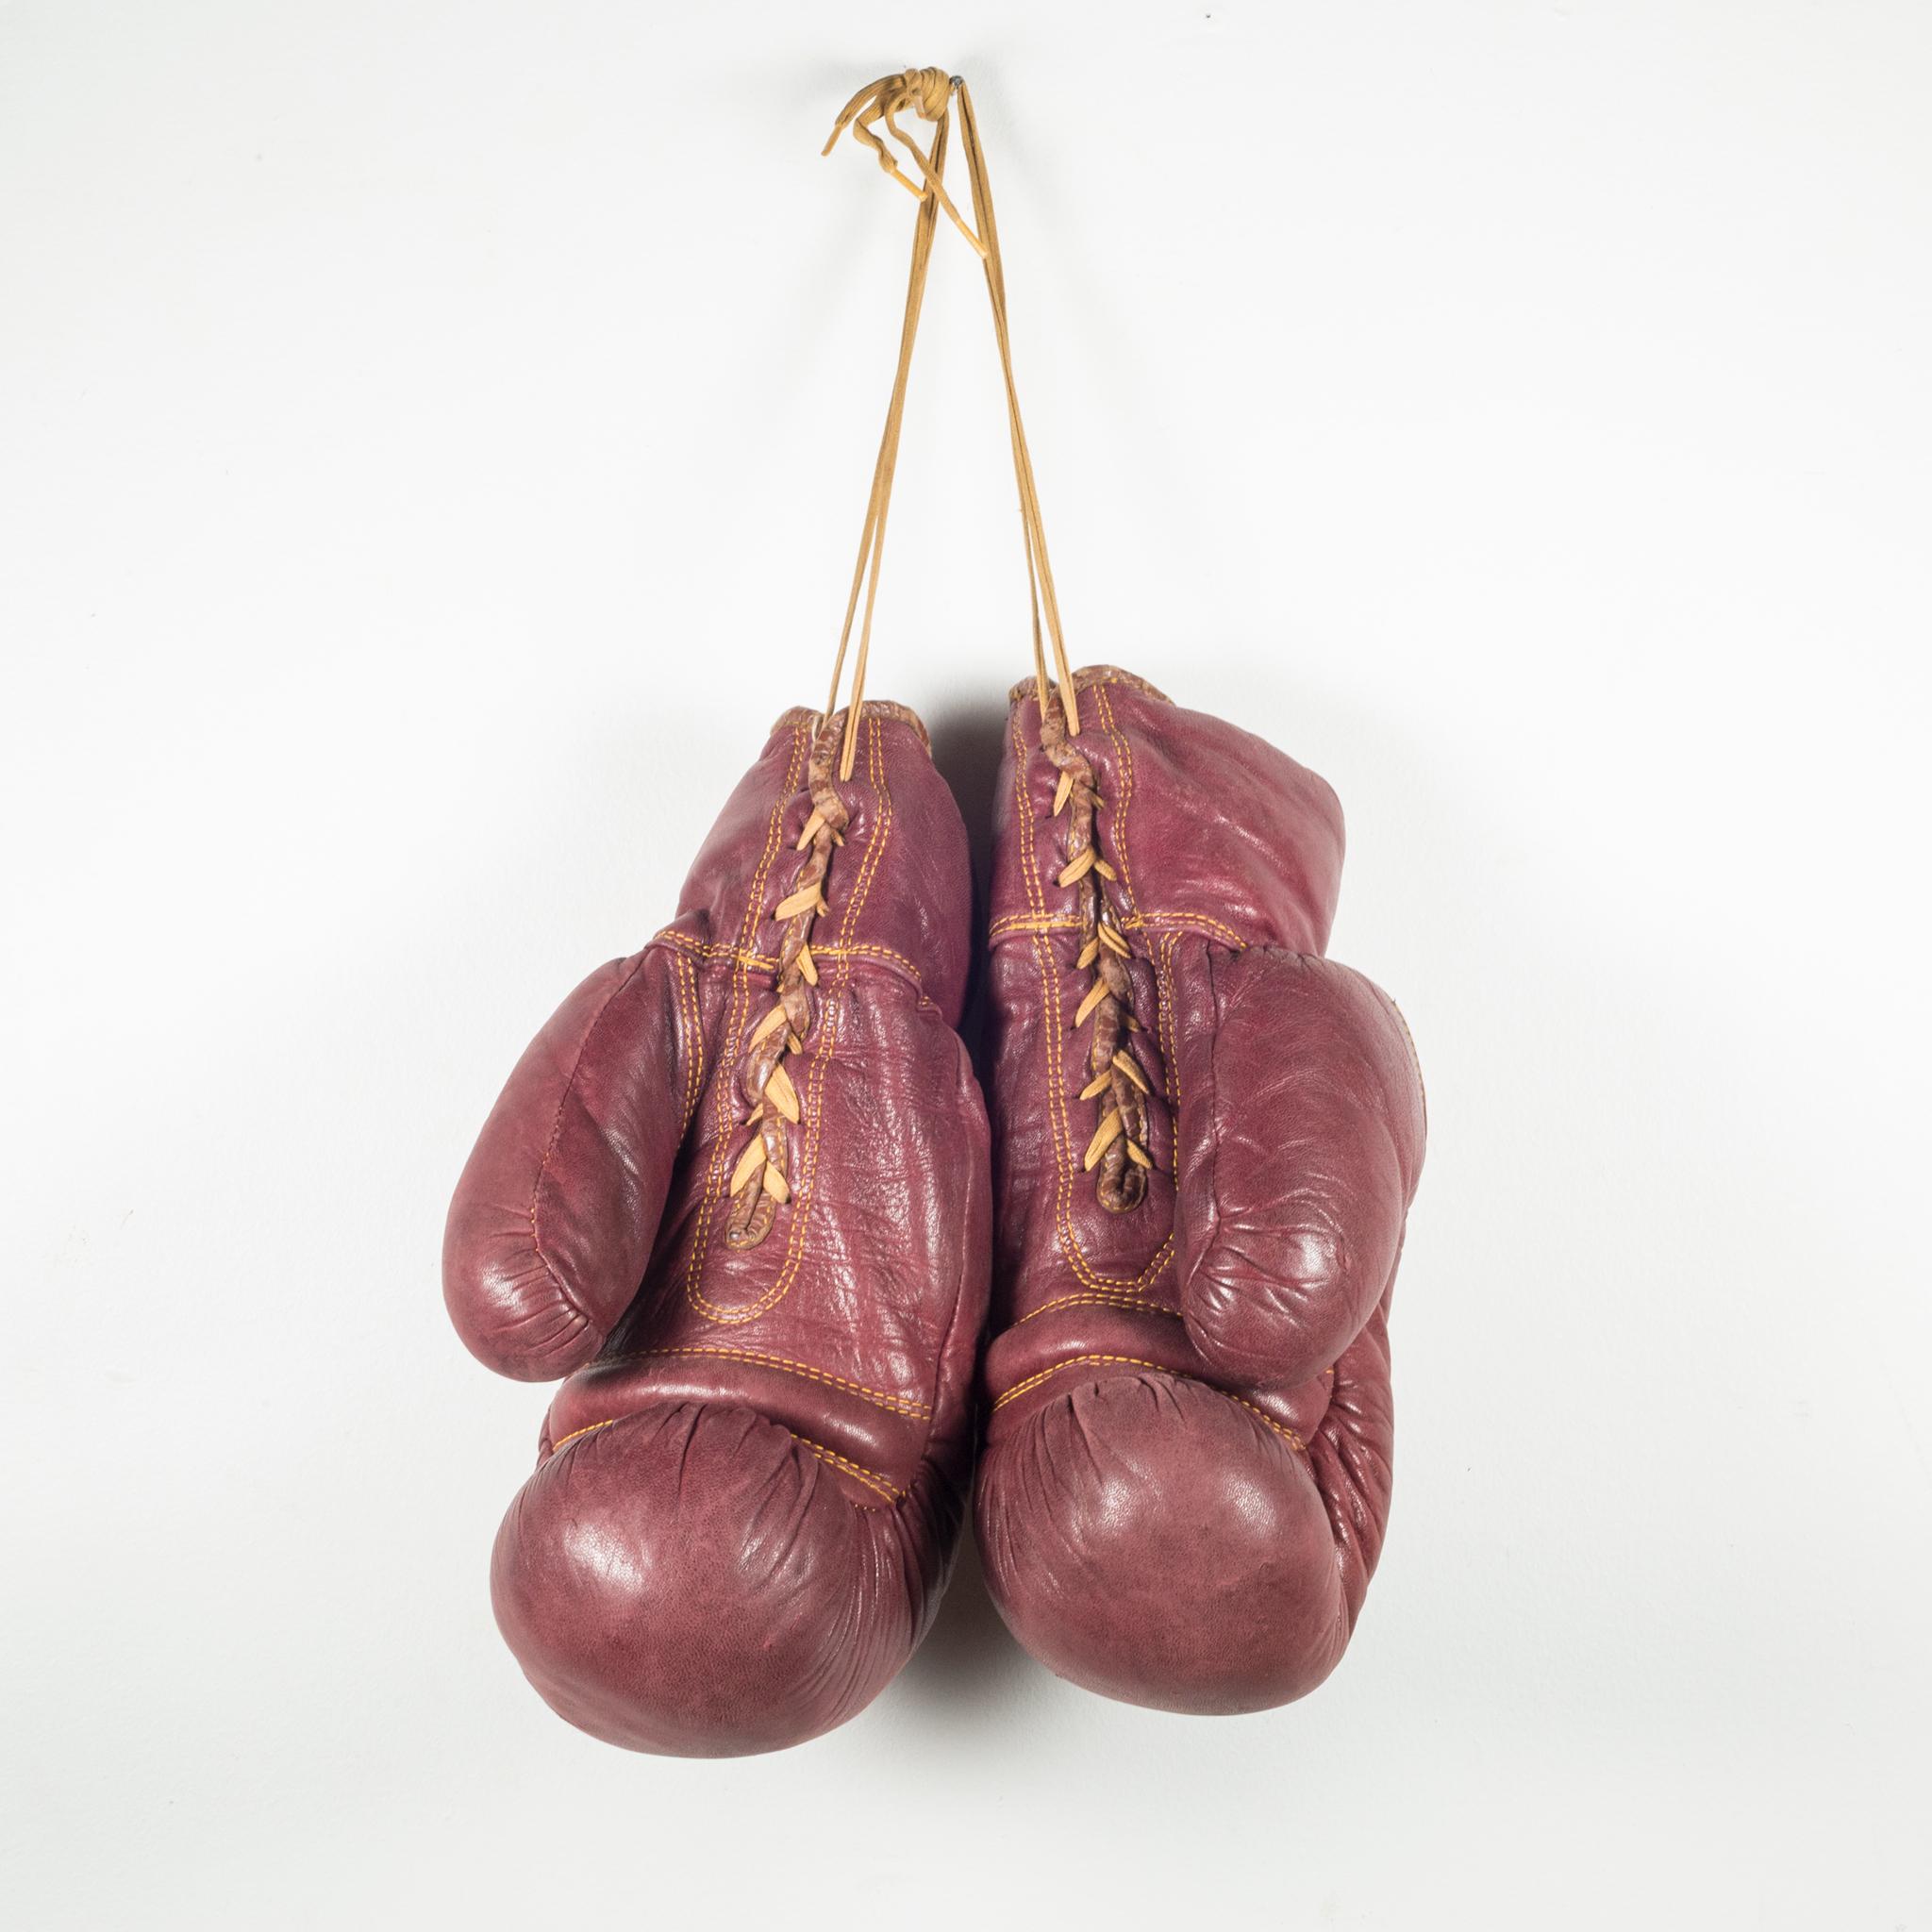 About

This is a original pair of vintage leather boxing gloves filled with horse hair. The gloves are a soft, maroon leather with gold stitching and laces. The are both stamped 